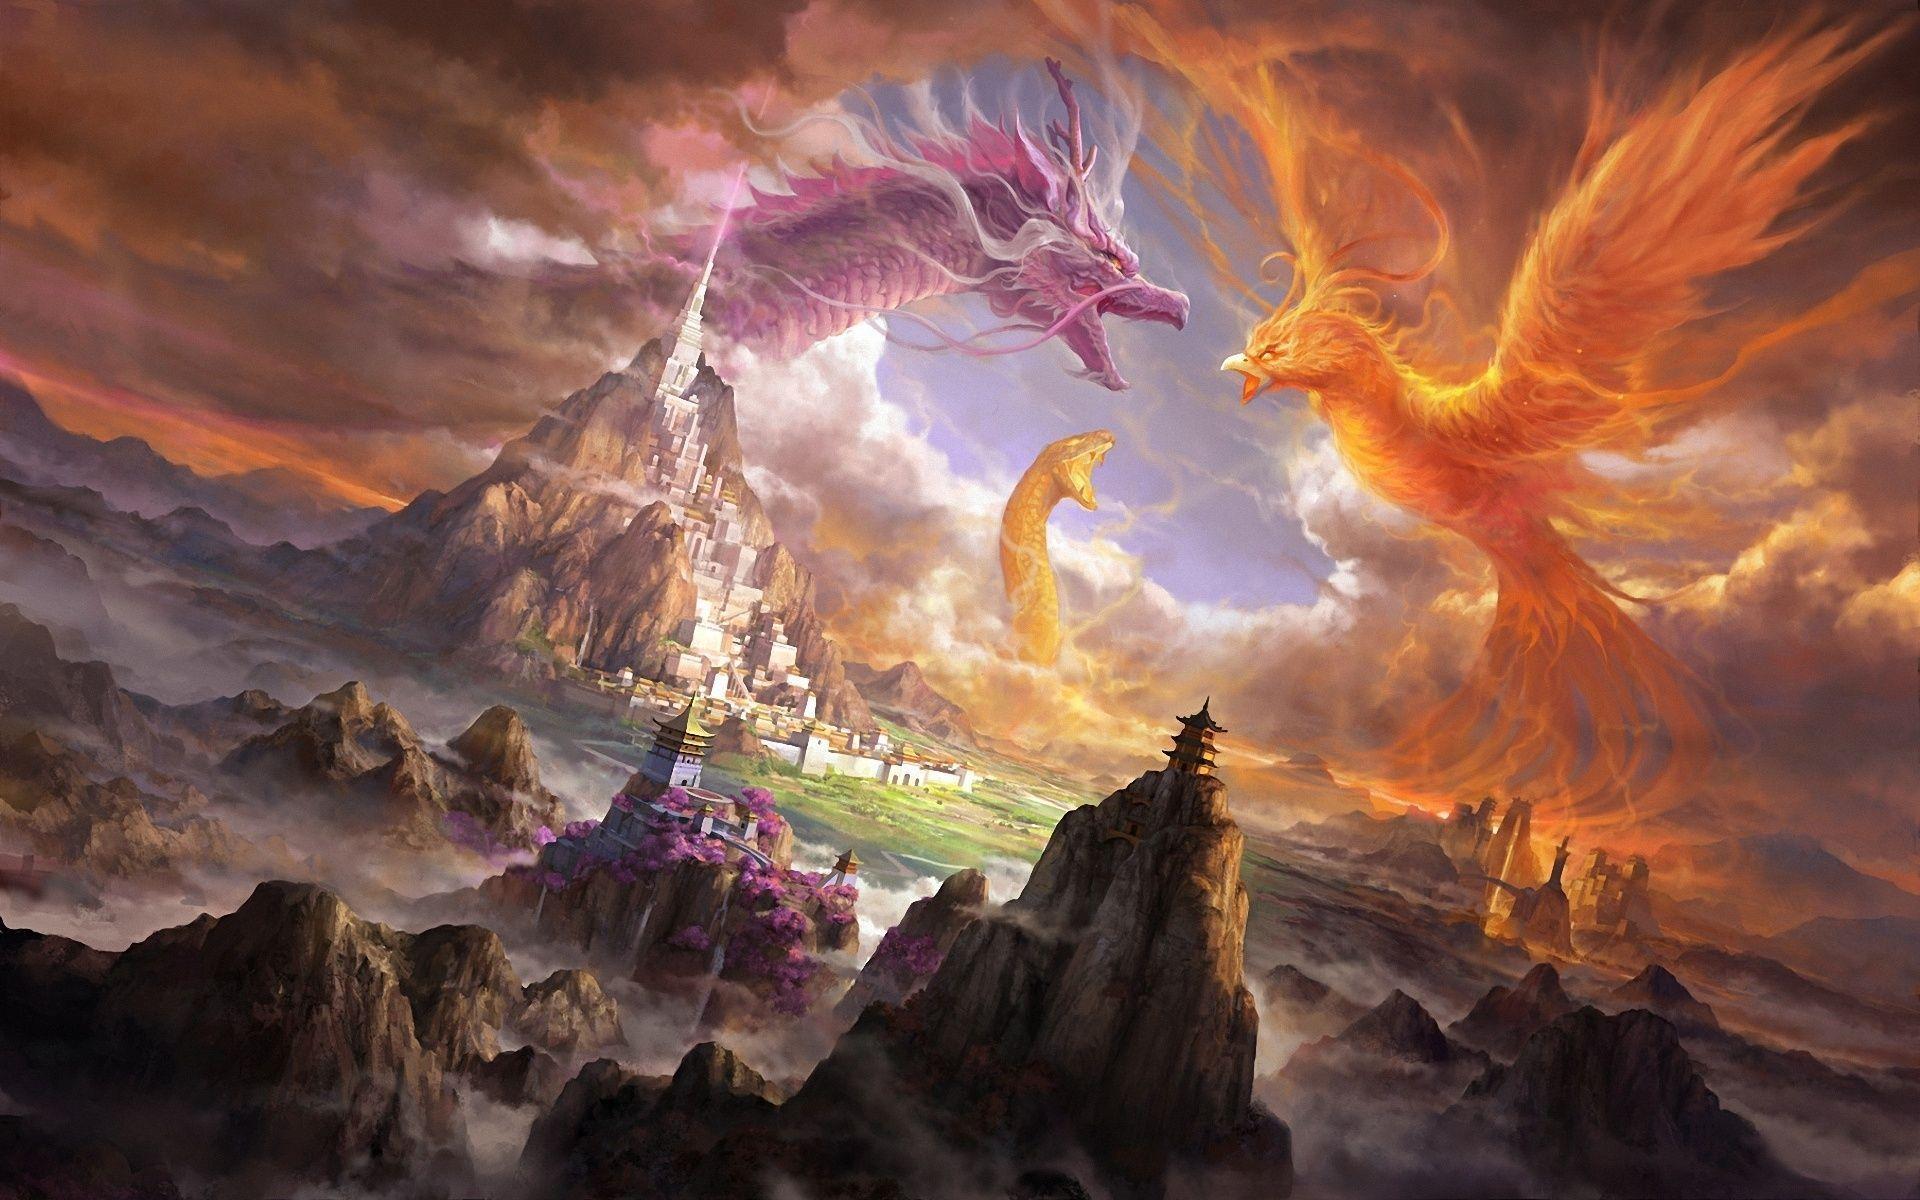 Colorful Monster Dragon Hydra: 4K Artwork Wallpaper - Free Download for PC